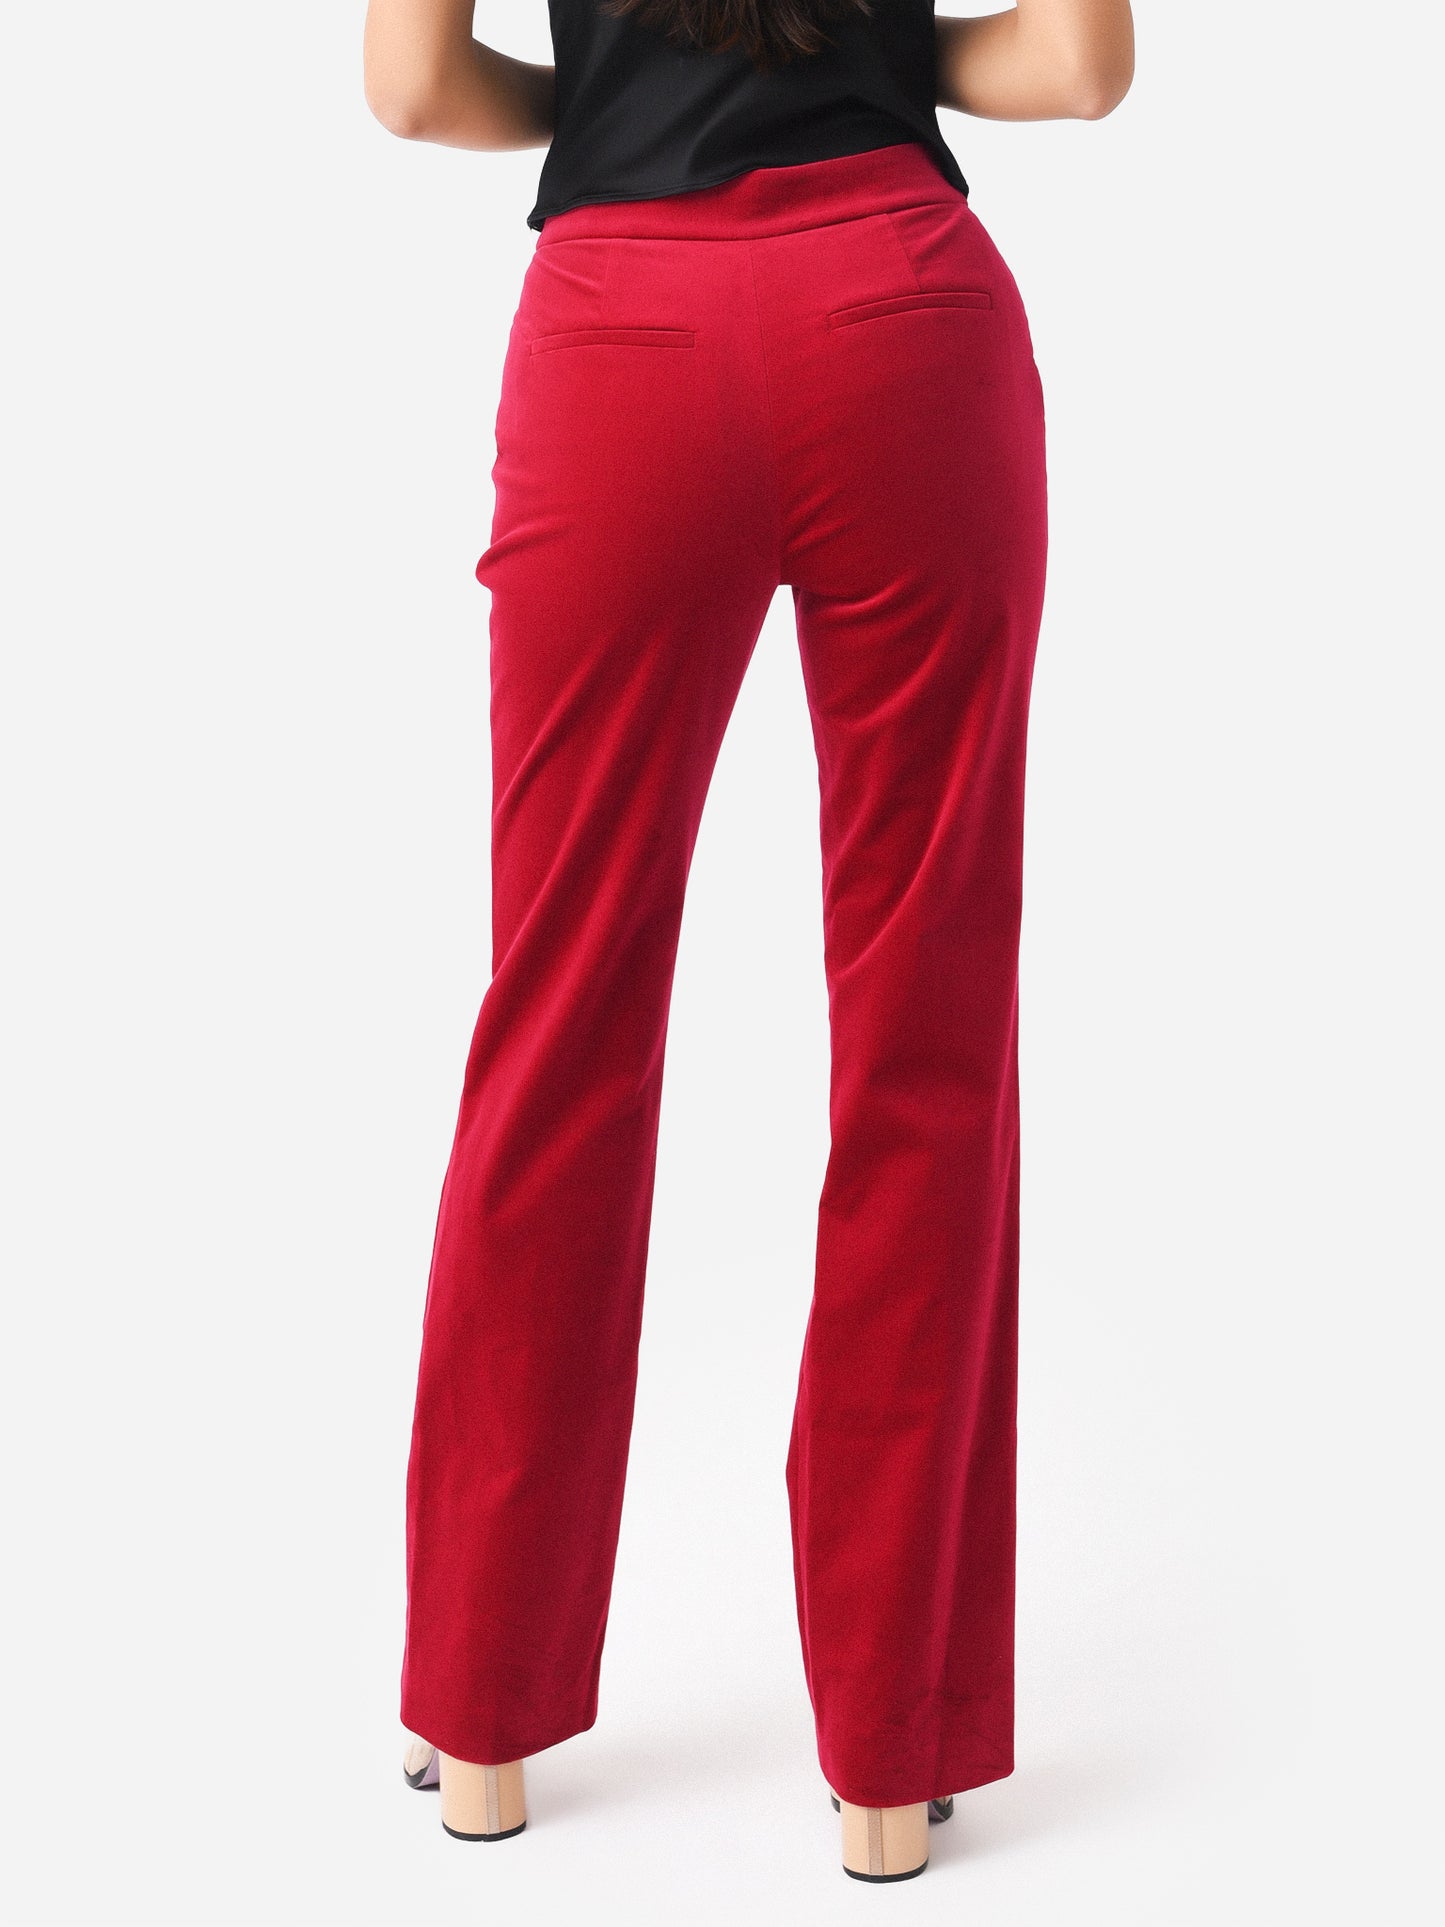 2PANT00803xELECTRICPINK-alt3